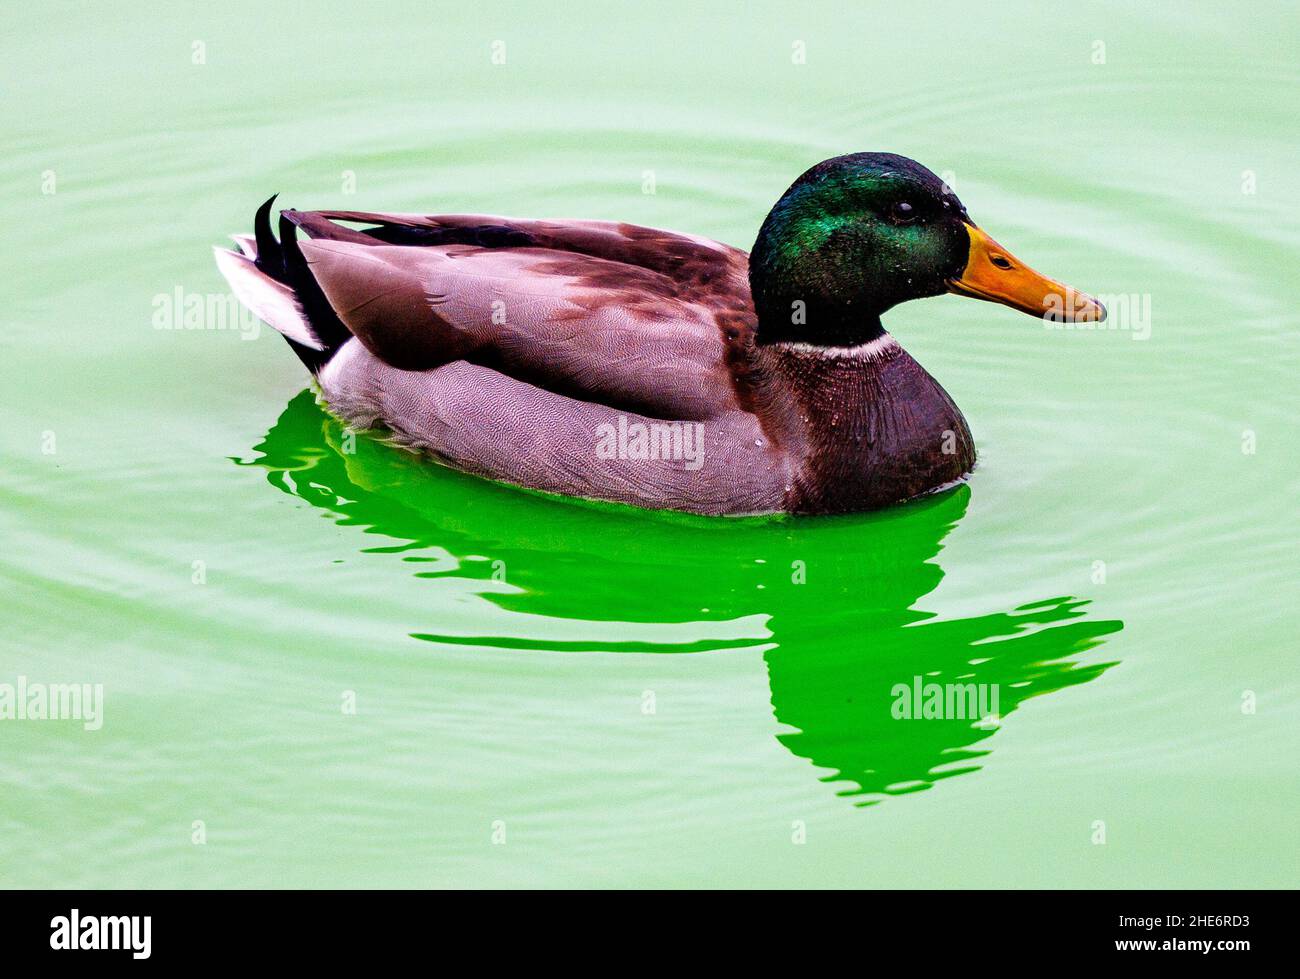 Kiel, Germany. 09th Jan, 2022. A duck swims on the green colored water of the 'Kleiner Kiel'. The body of water in the city center, which belongs to the Kiel Fjord, is colored green by the inflow of water from a broken pipe in the district heating pipeline. According to the municipal utility, the green dye in the district heating water is harmless to the environment and health. Credit: Axel Heimken/dpa/Alamy Live News Stock Photo